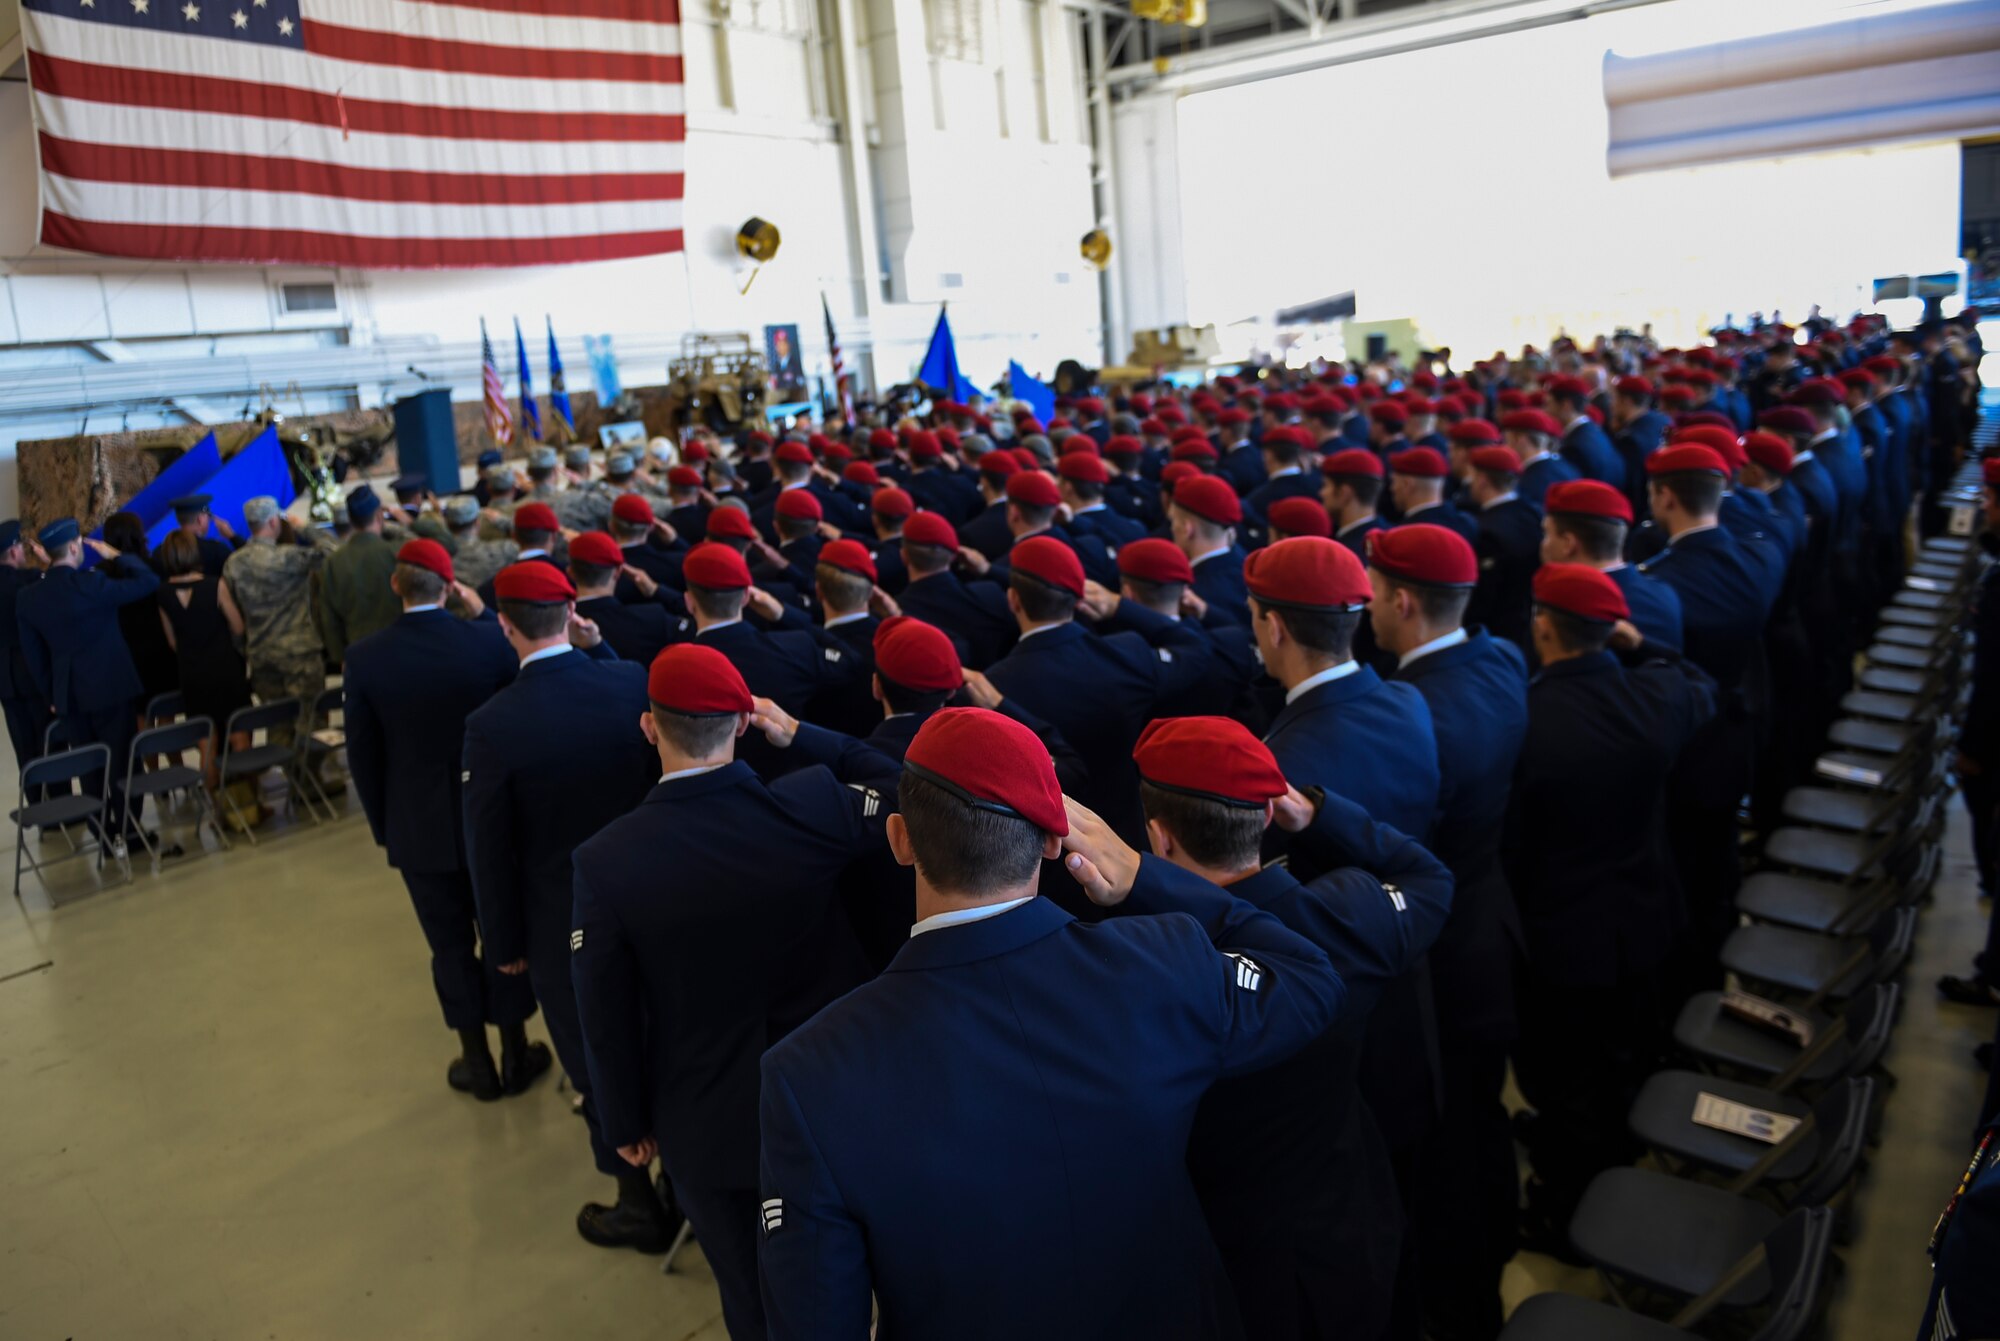 Airmen salute during Capt. Matthew D. Roland and Staff Sgt. Forrest B. Sibley’s memorial service, Sept. 14, 2015, at Hurlburt Field, Fla. More than 1,000 friends and family members from across the country gathered together to mourn the loss of Roland, a special tactics officer from 23rd Special Tactics Squadron, and Sibley, a combat controller from the 21st Special Tactics Squadron. (U.S. Air Force photo by Senior Airman Ryan Conroy/Released) 

